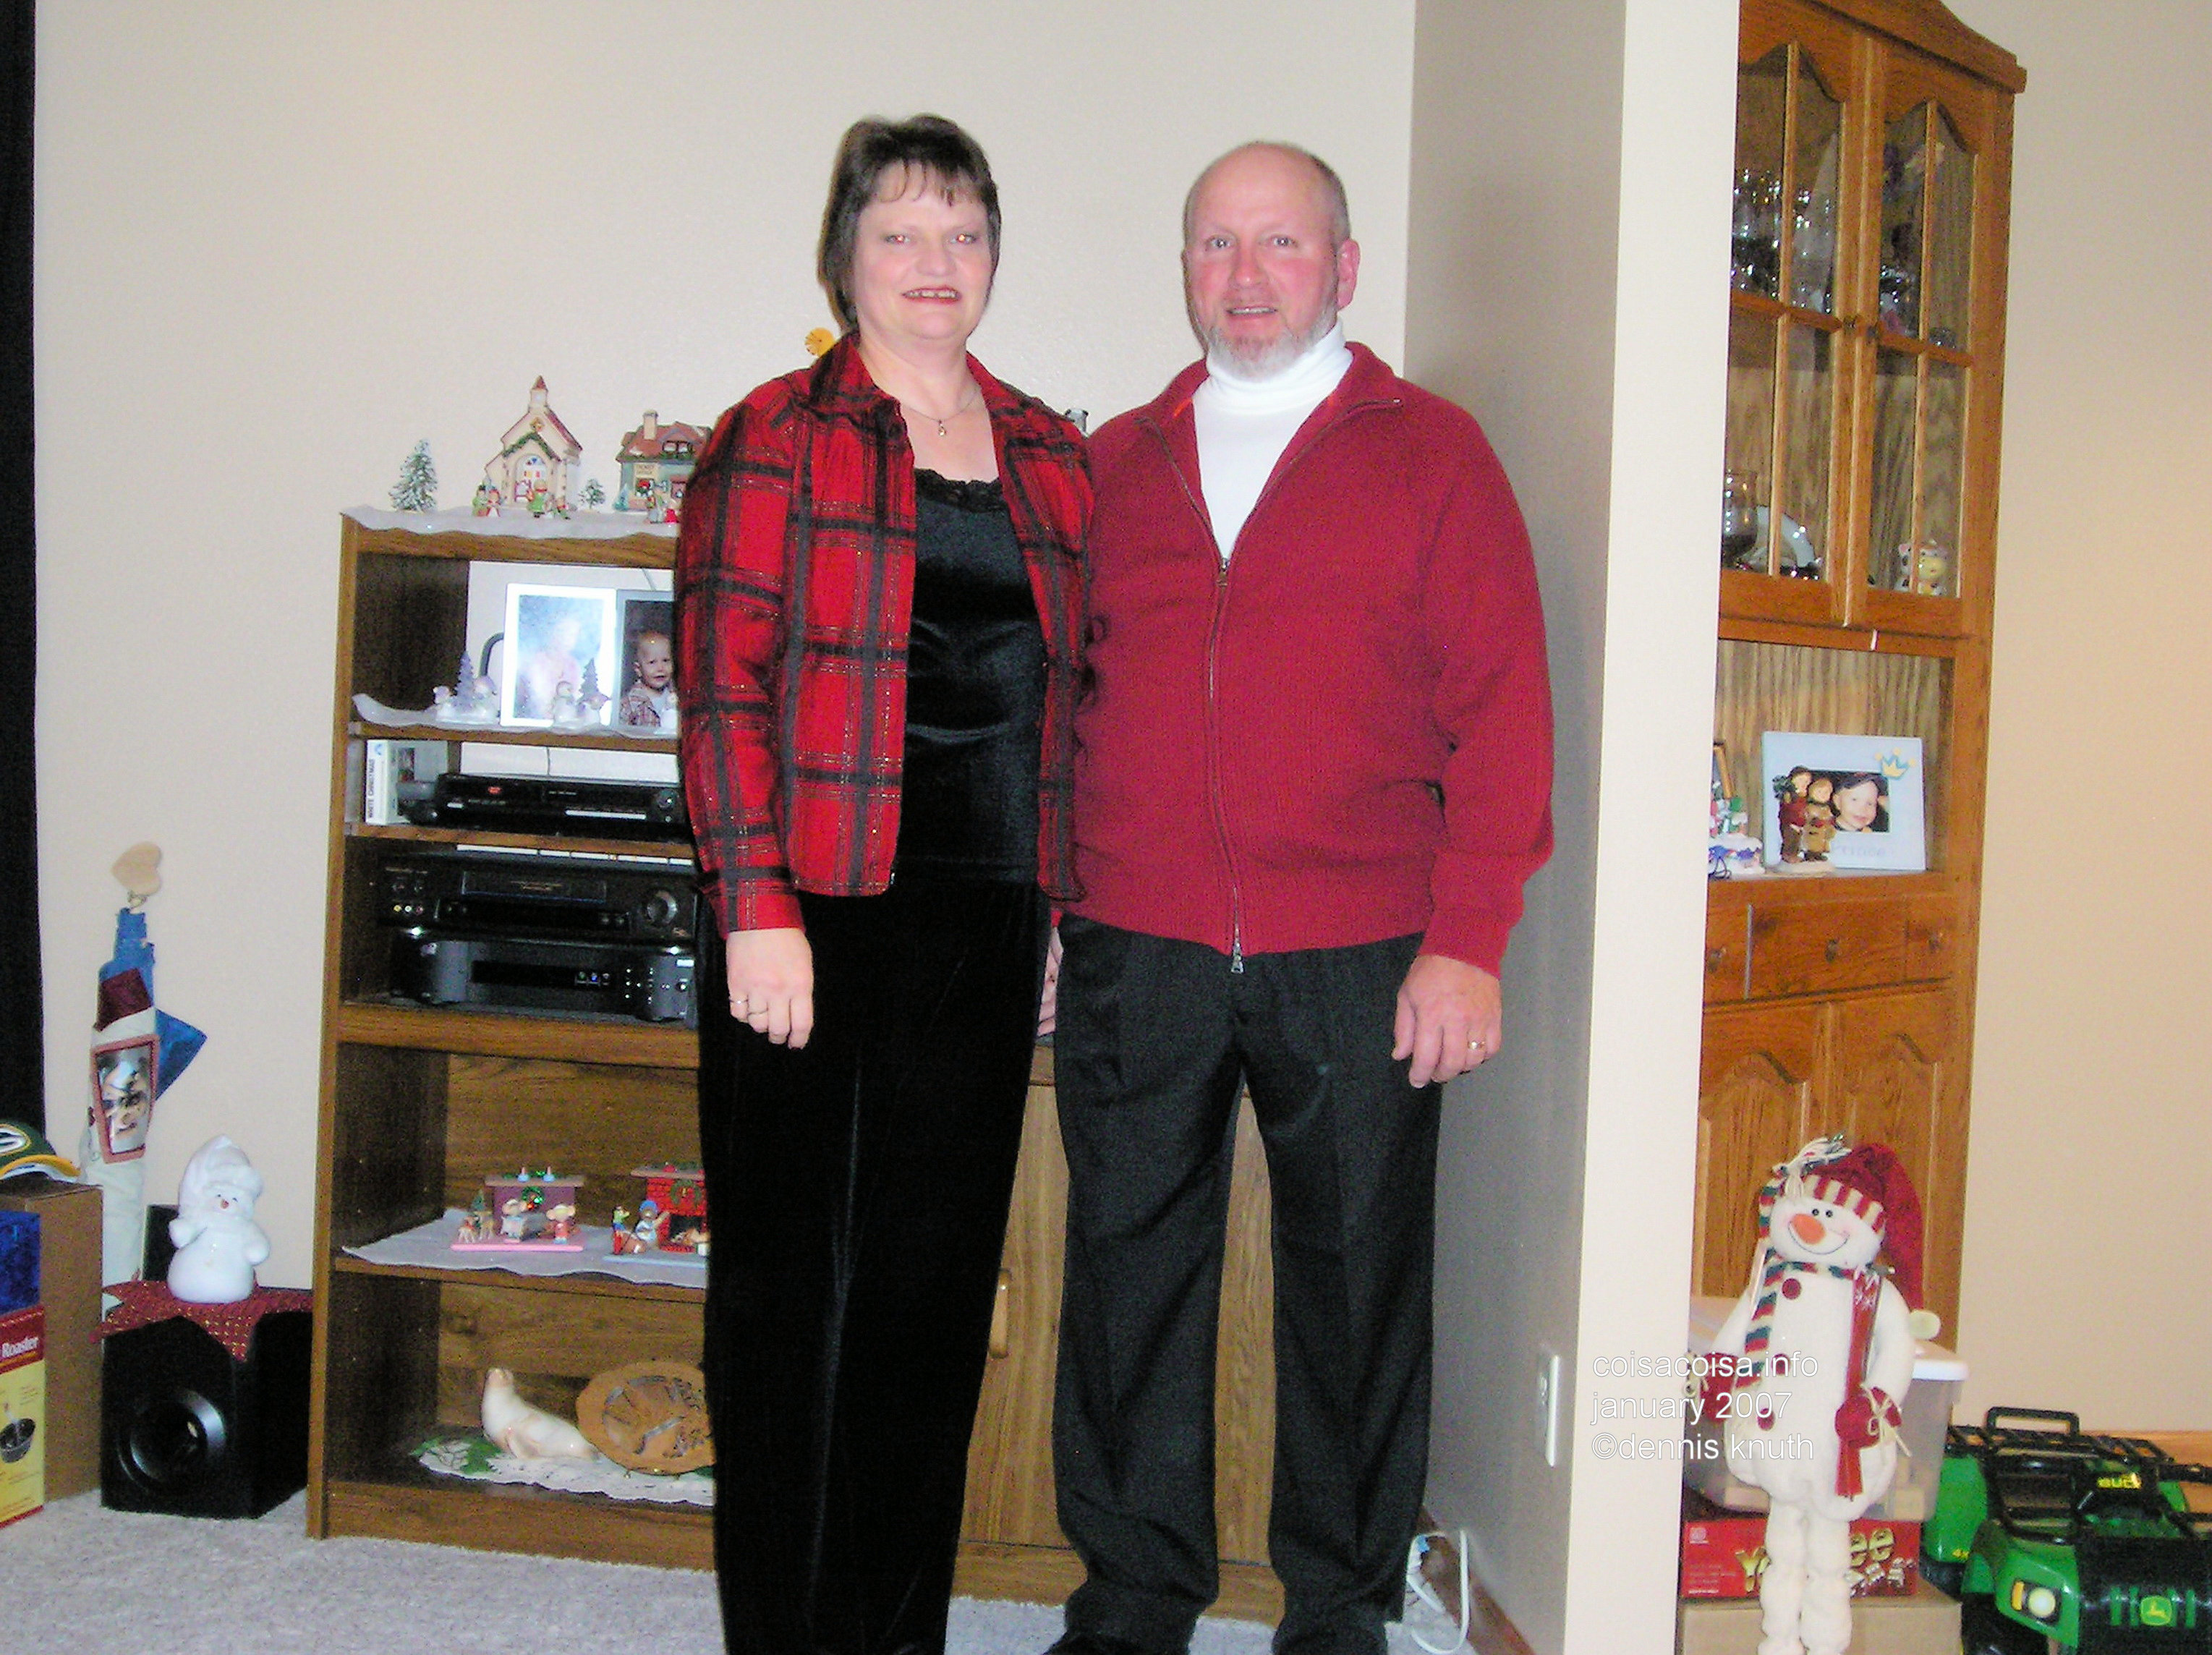 Sherri and Gary Dressed to Go Out